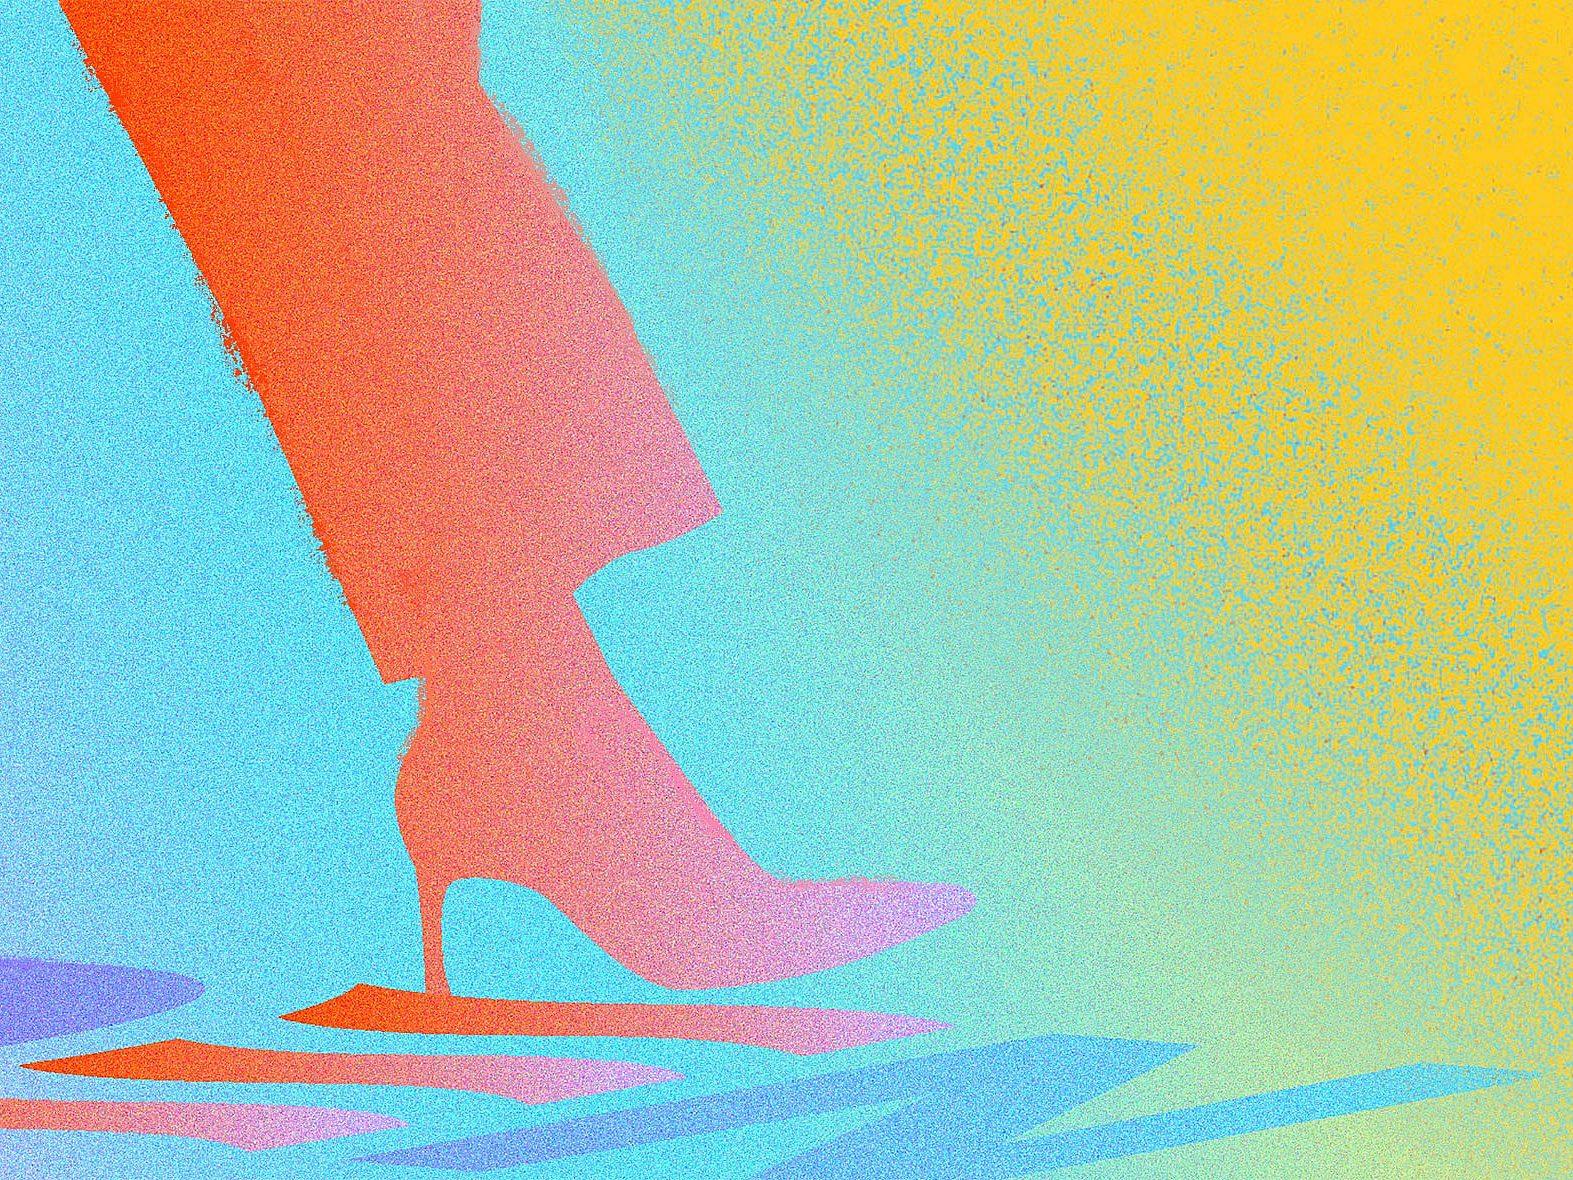 A colorful abstract image showing a person's lower leg and foot wearing a high-heeled shoe. The background features a gradient of blue, yellow, and green hues, and the leg casts a shadow with contrasting vivid colors.